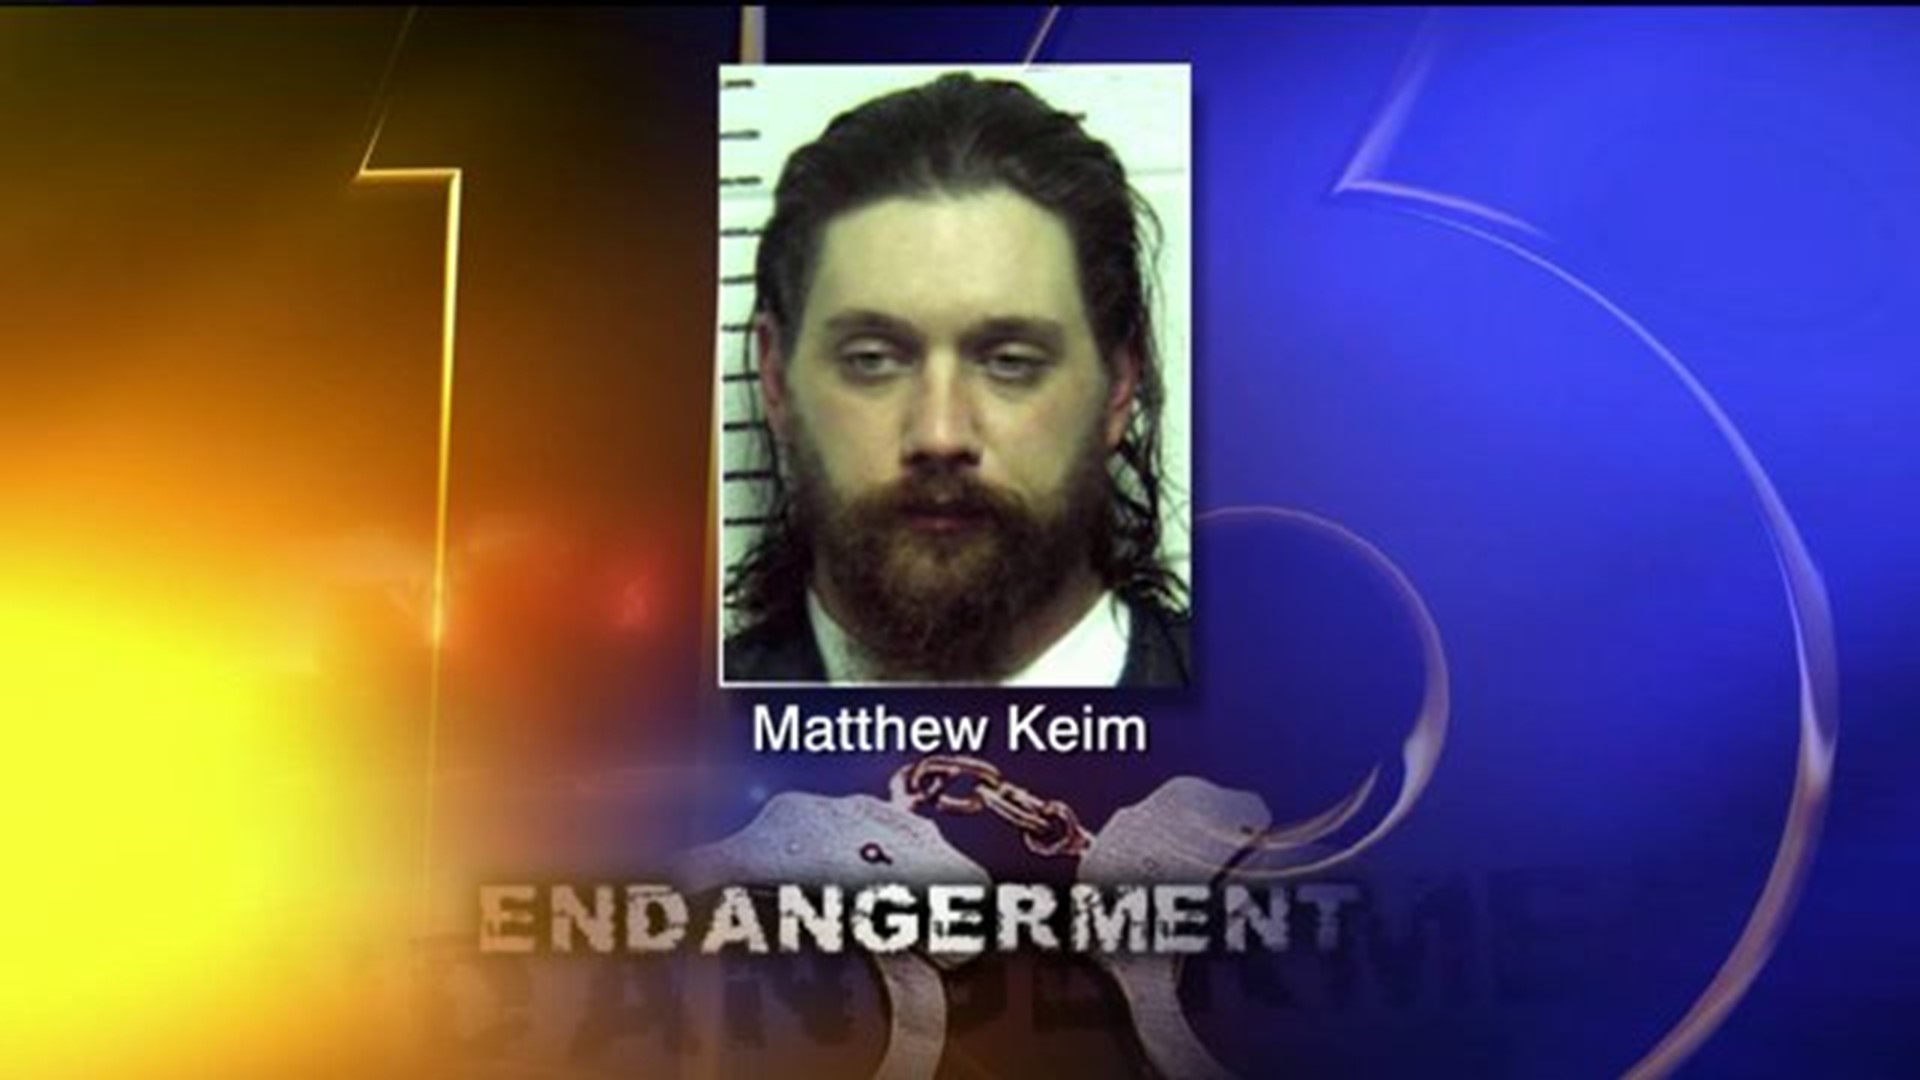 Gunfire Leads To Endangerment Charges